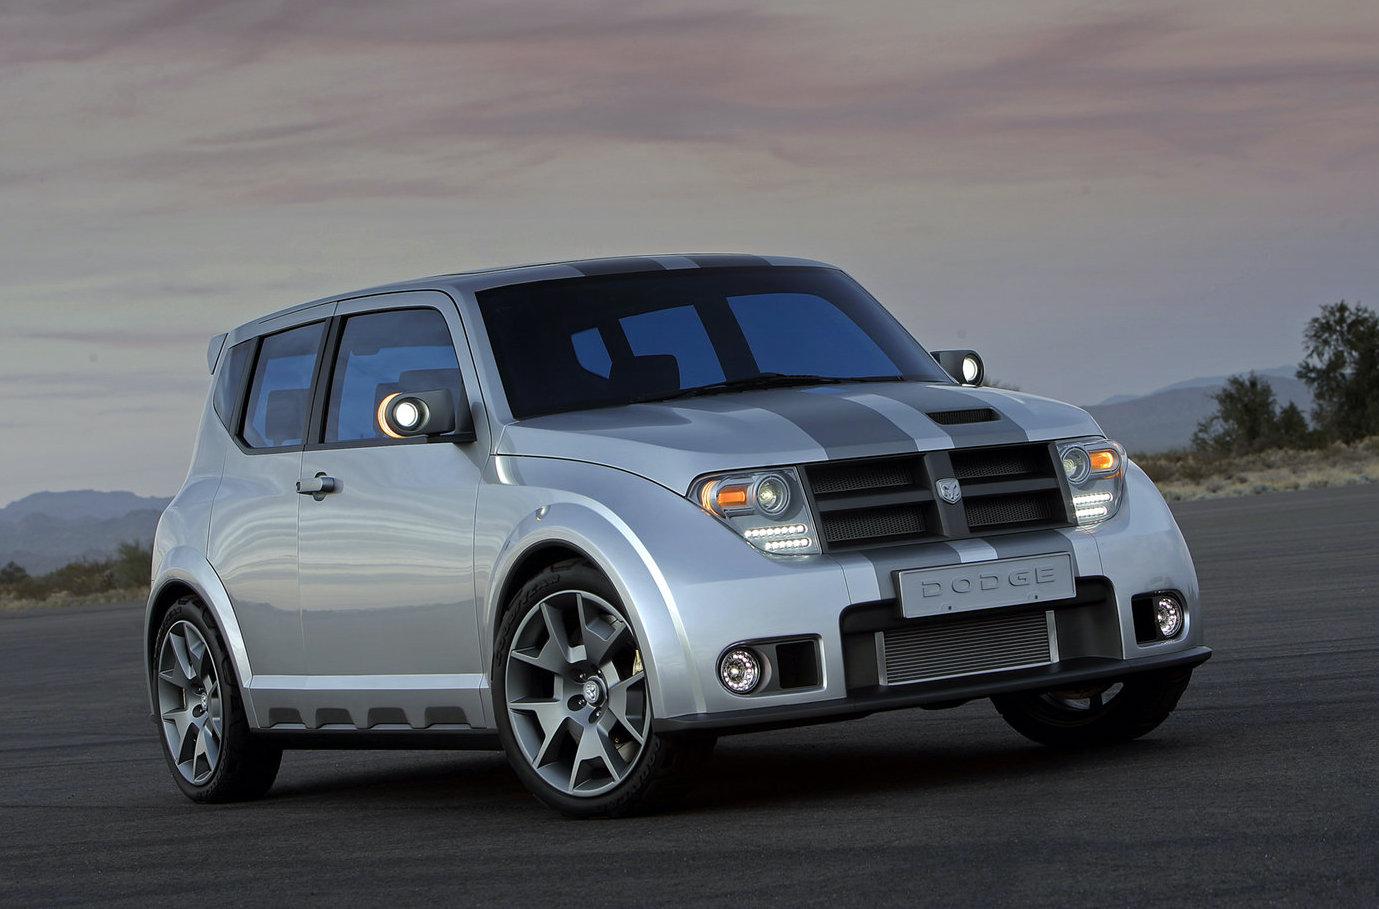 The Dodge Hornet Concept Had A Supercharged Mini Cooper S Engine And No B-Pillars